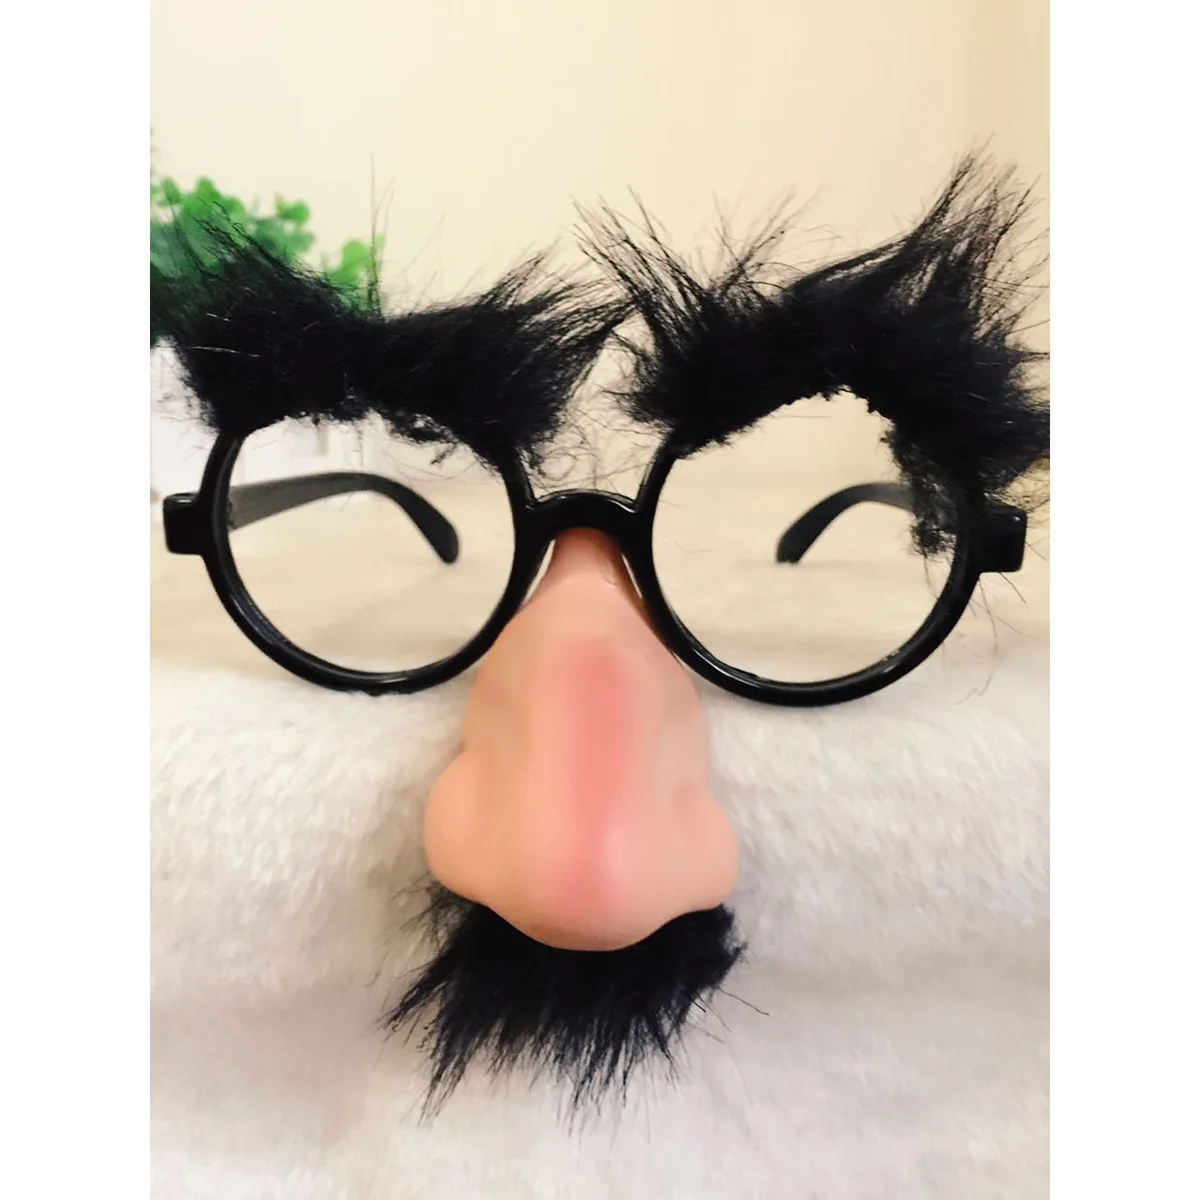 

Classic Disguise Prop Fuzzy Nose Glasses with Eyebrow and Mustache Prank Tool